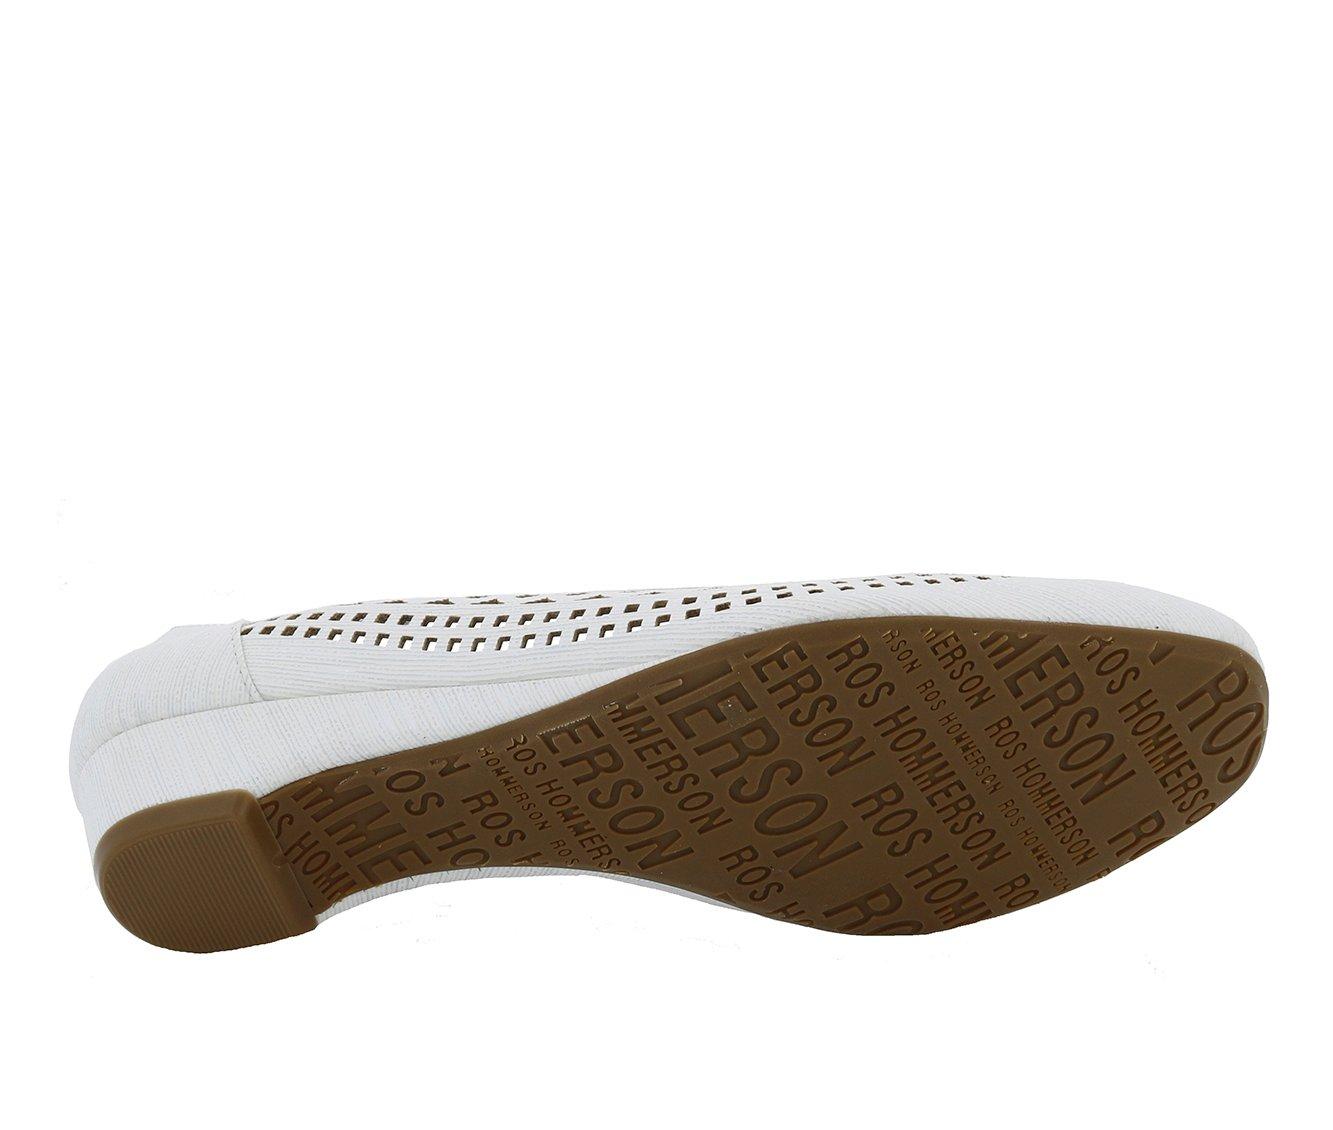 Women's Ros Hommerson Tina Flats